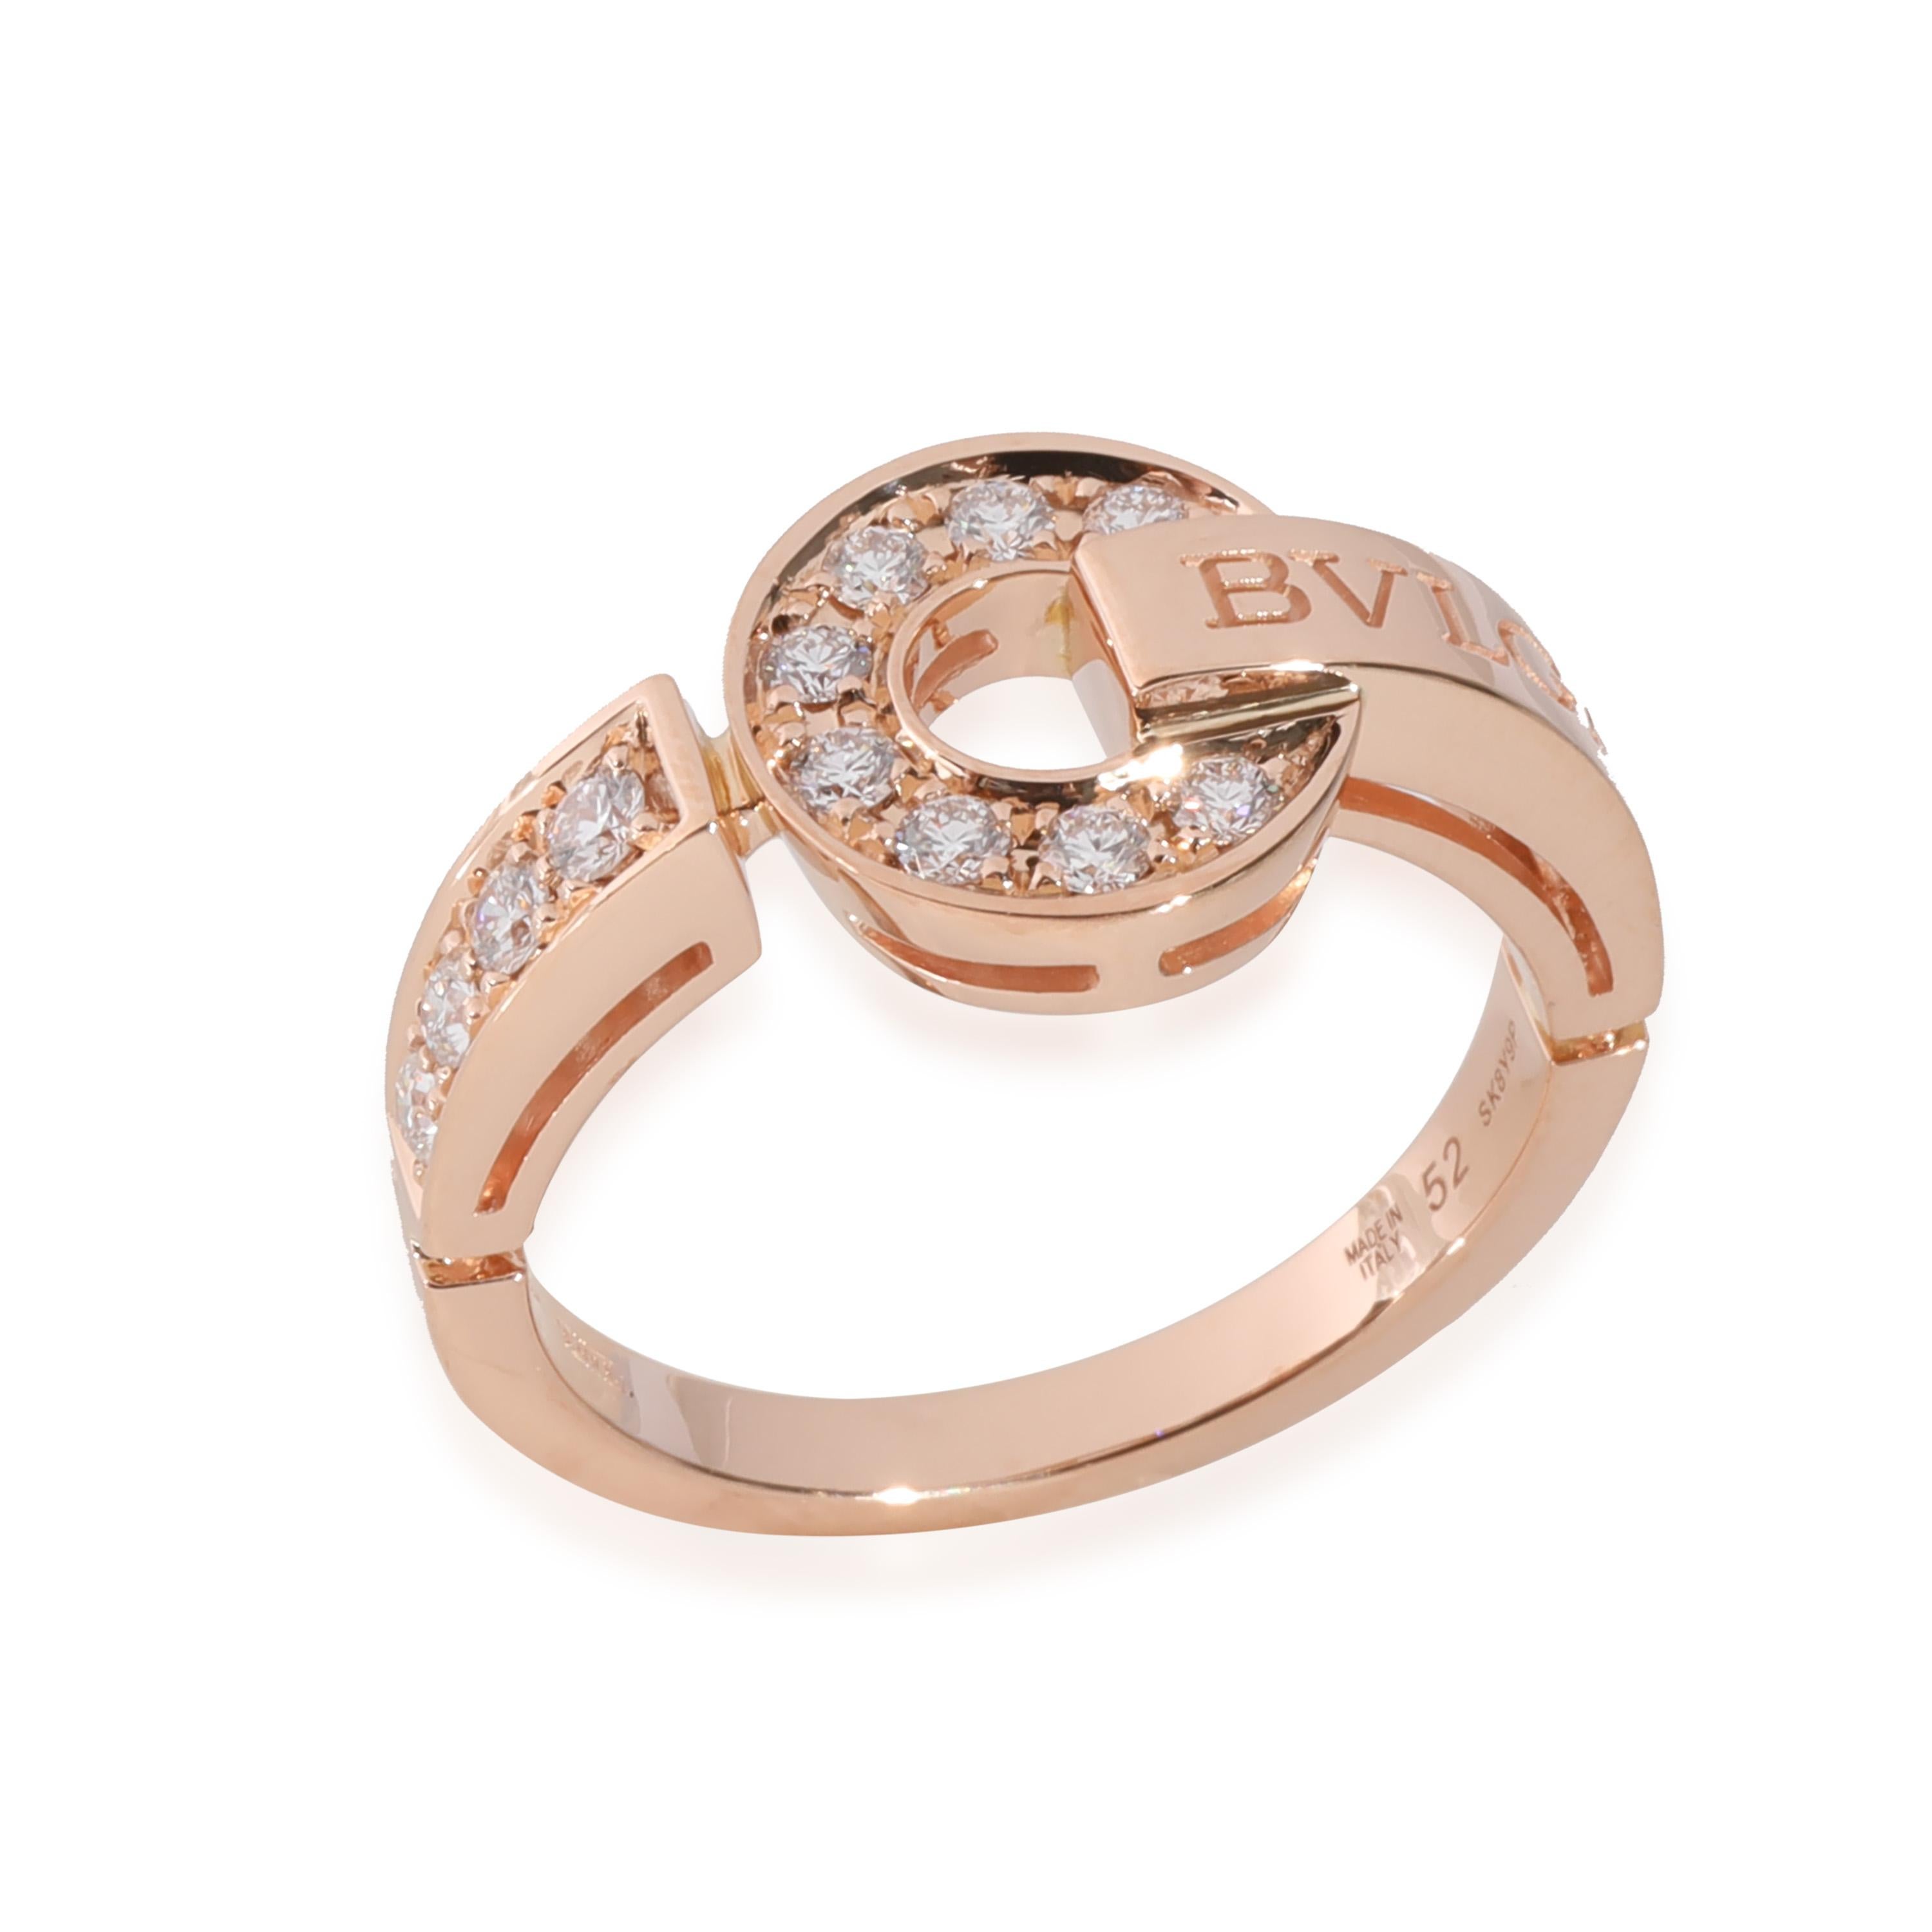 BVLGARI Bvlgari Bvlgari Diamond  Ring in 18k Rose Gold 0.28 CTW

PRIMARY DETAILS
SKU: 125257
Listing Title: BVLGARI Bvlgari Bvlgari Diamond  Ring in 18k Rose Gold 0.28 CTW
Condition Description: Retails for 4400 USD. In excellent condition and